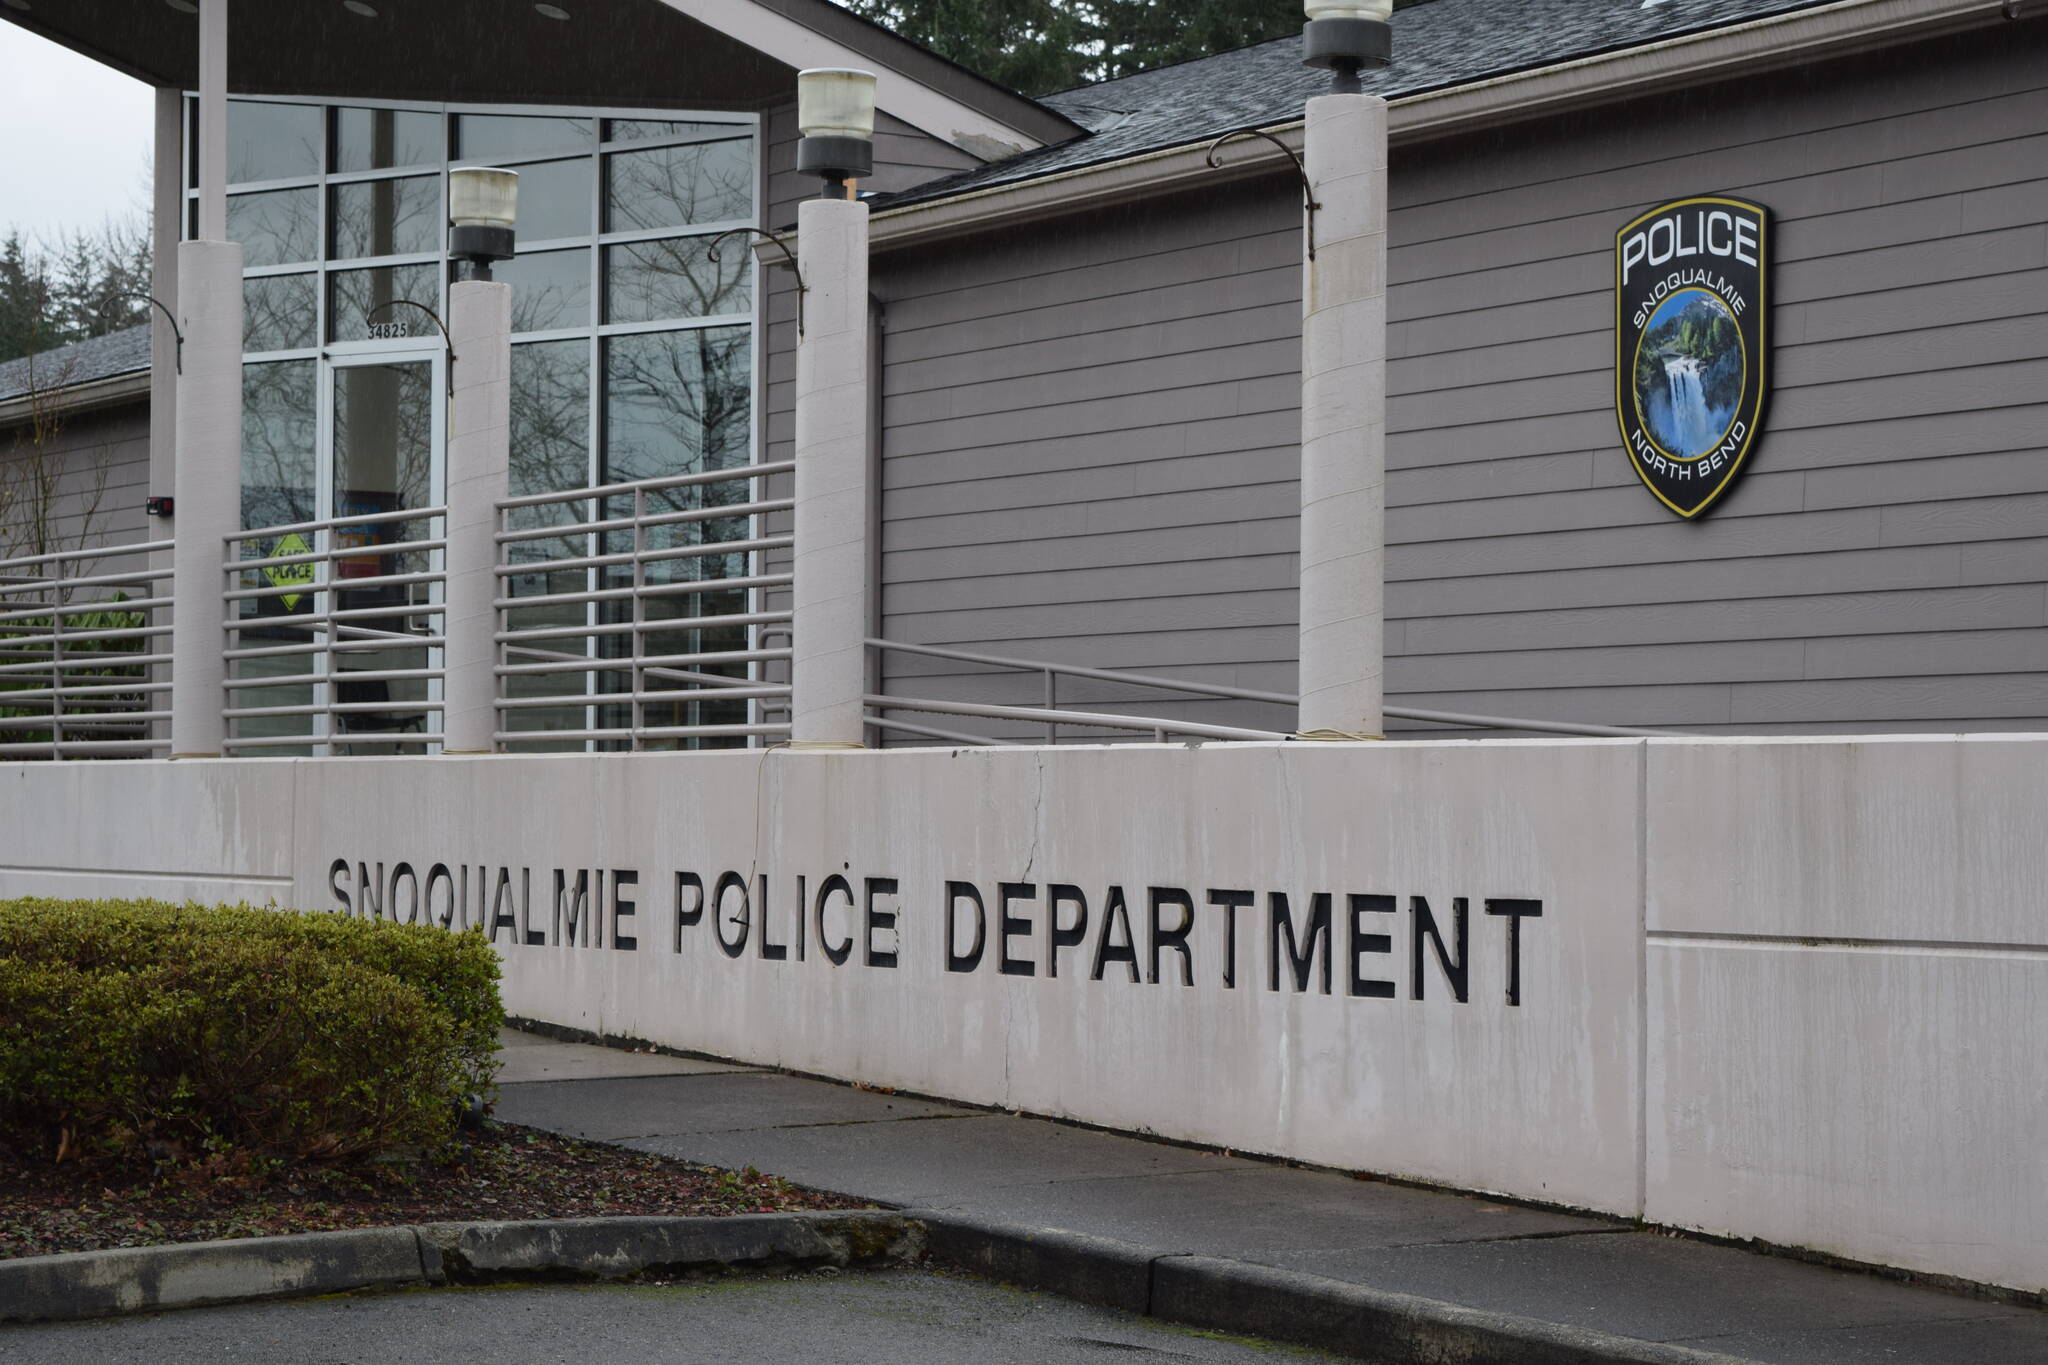 Outside of the Snoqualmie Police Department. Photo by Conor Wilson/Valley Record